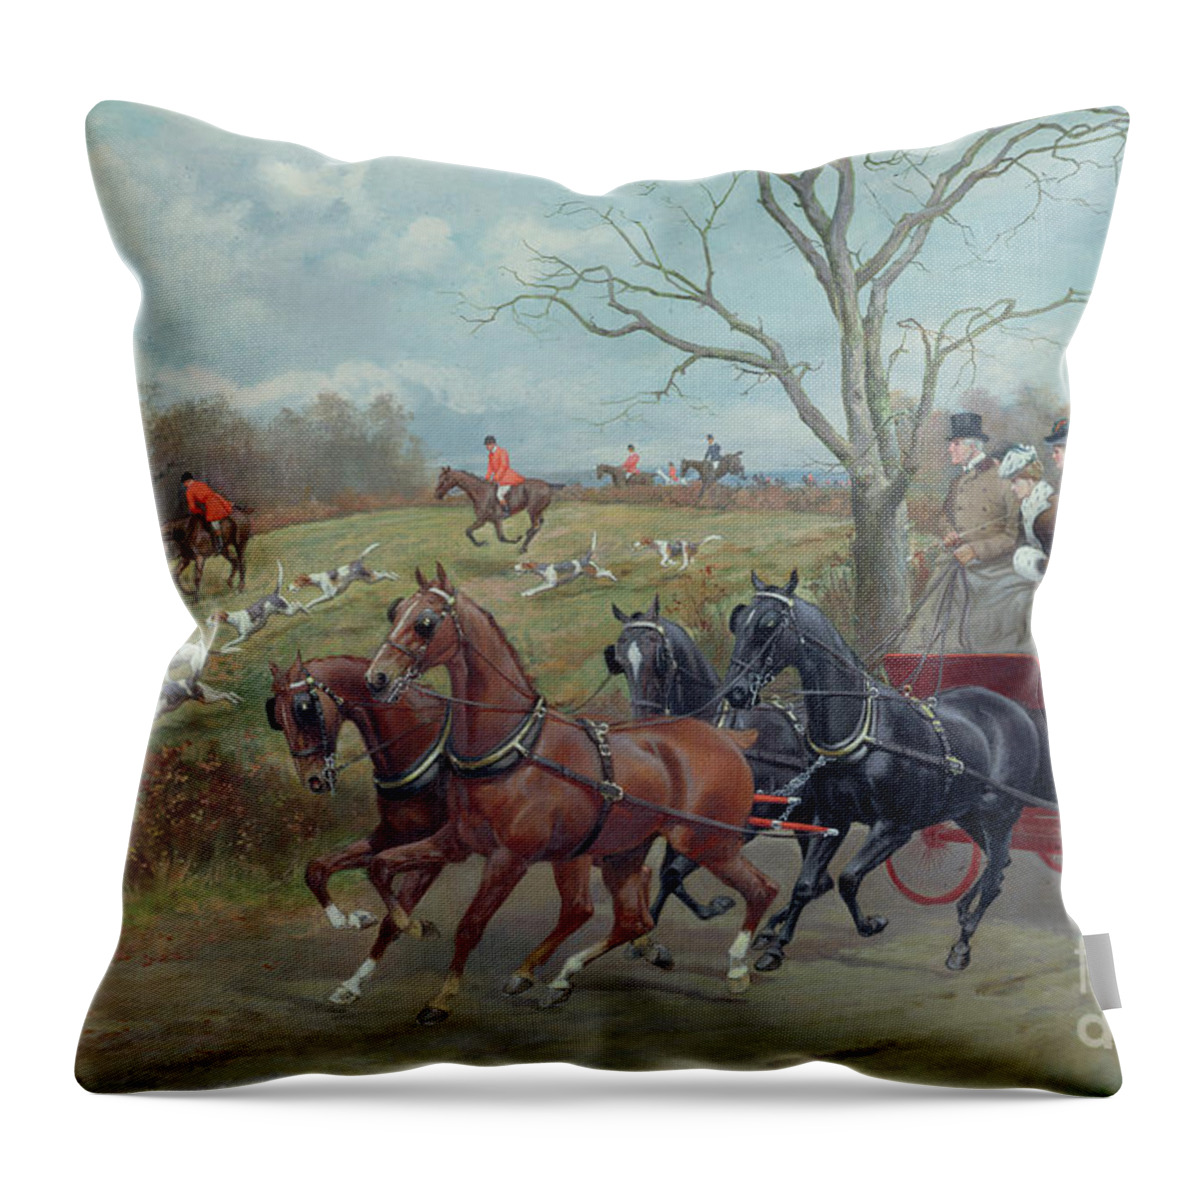 Hunting Throw Pillow featuring the painting The Kill by George Derville Rowlandson